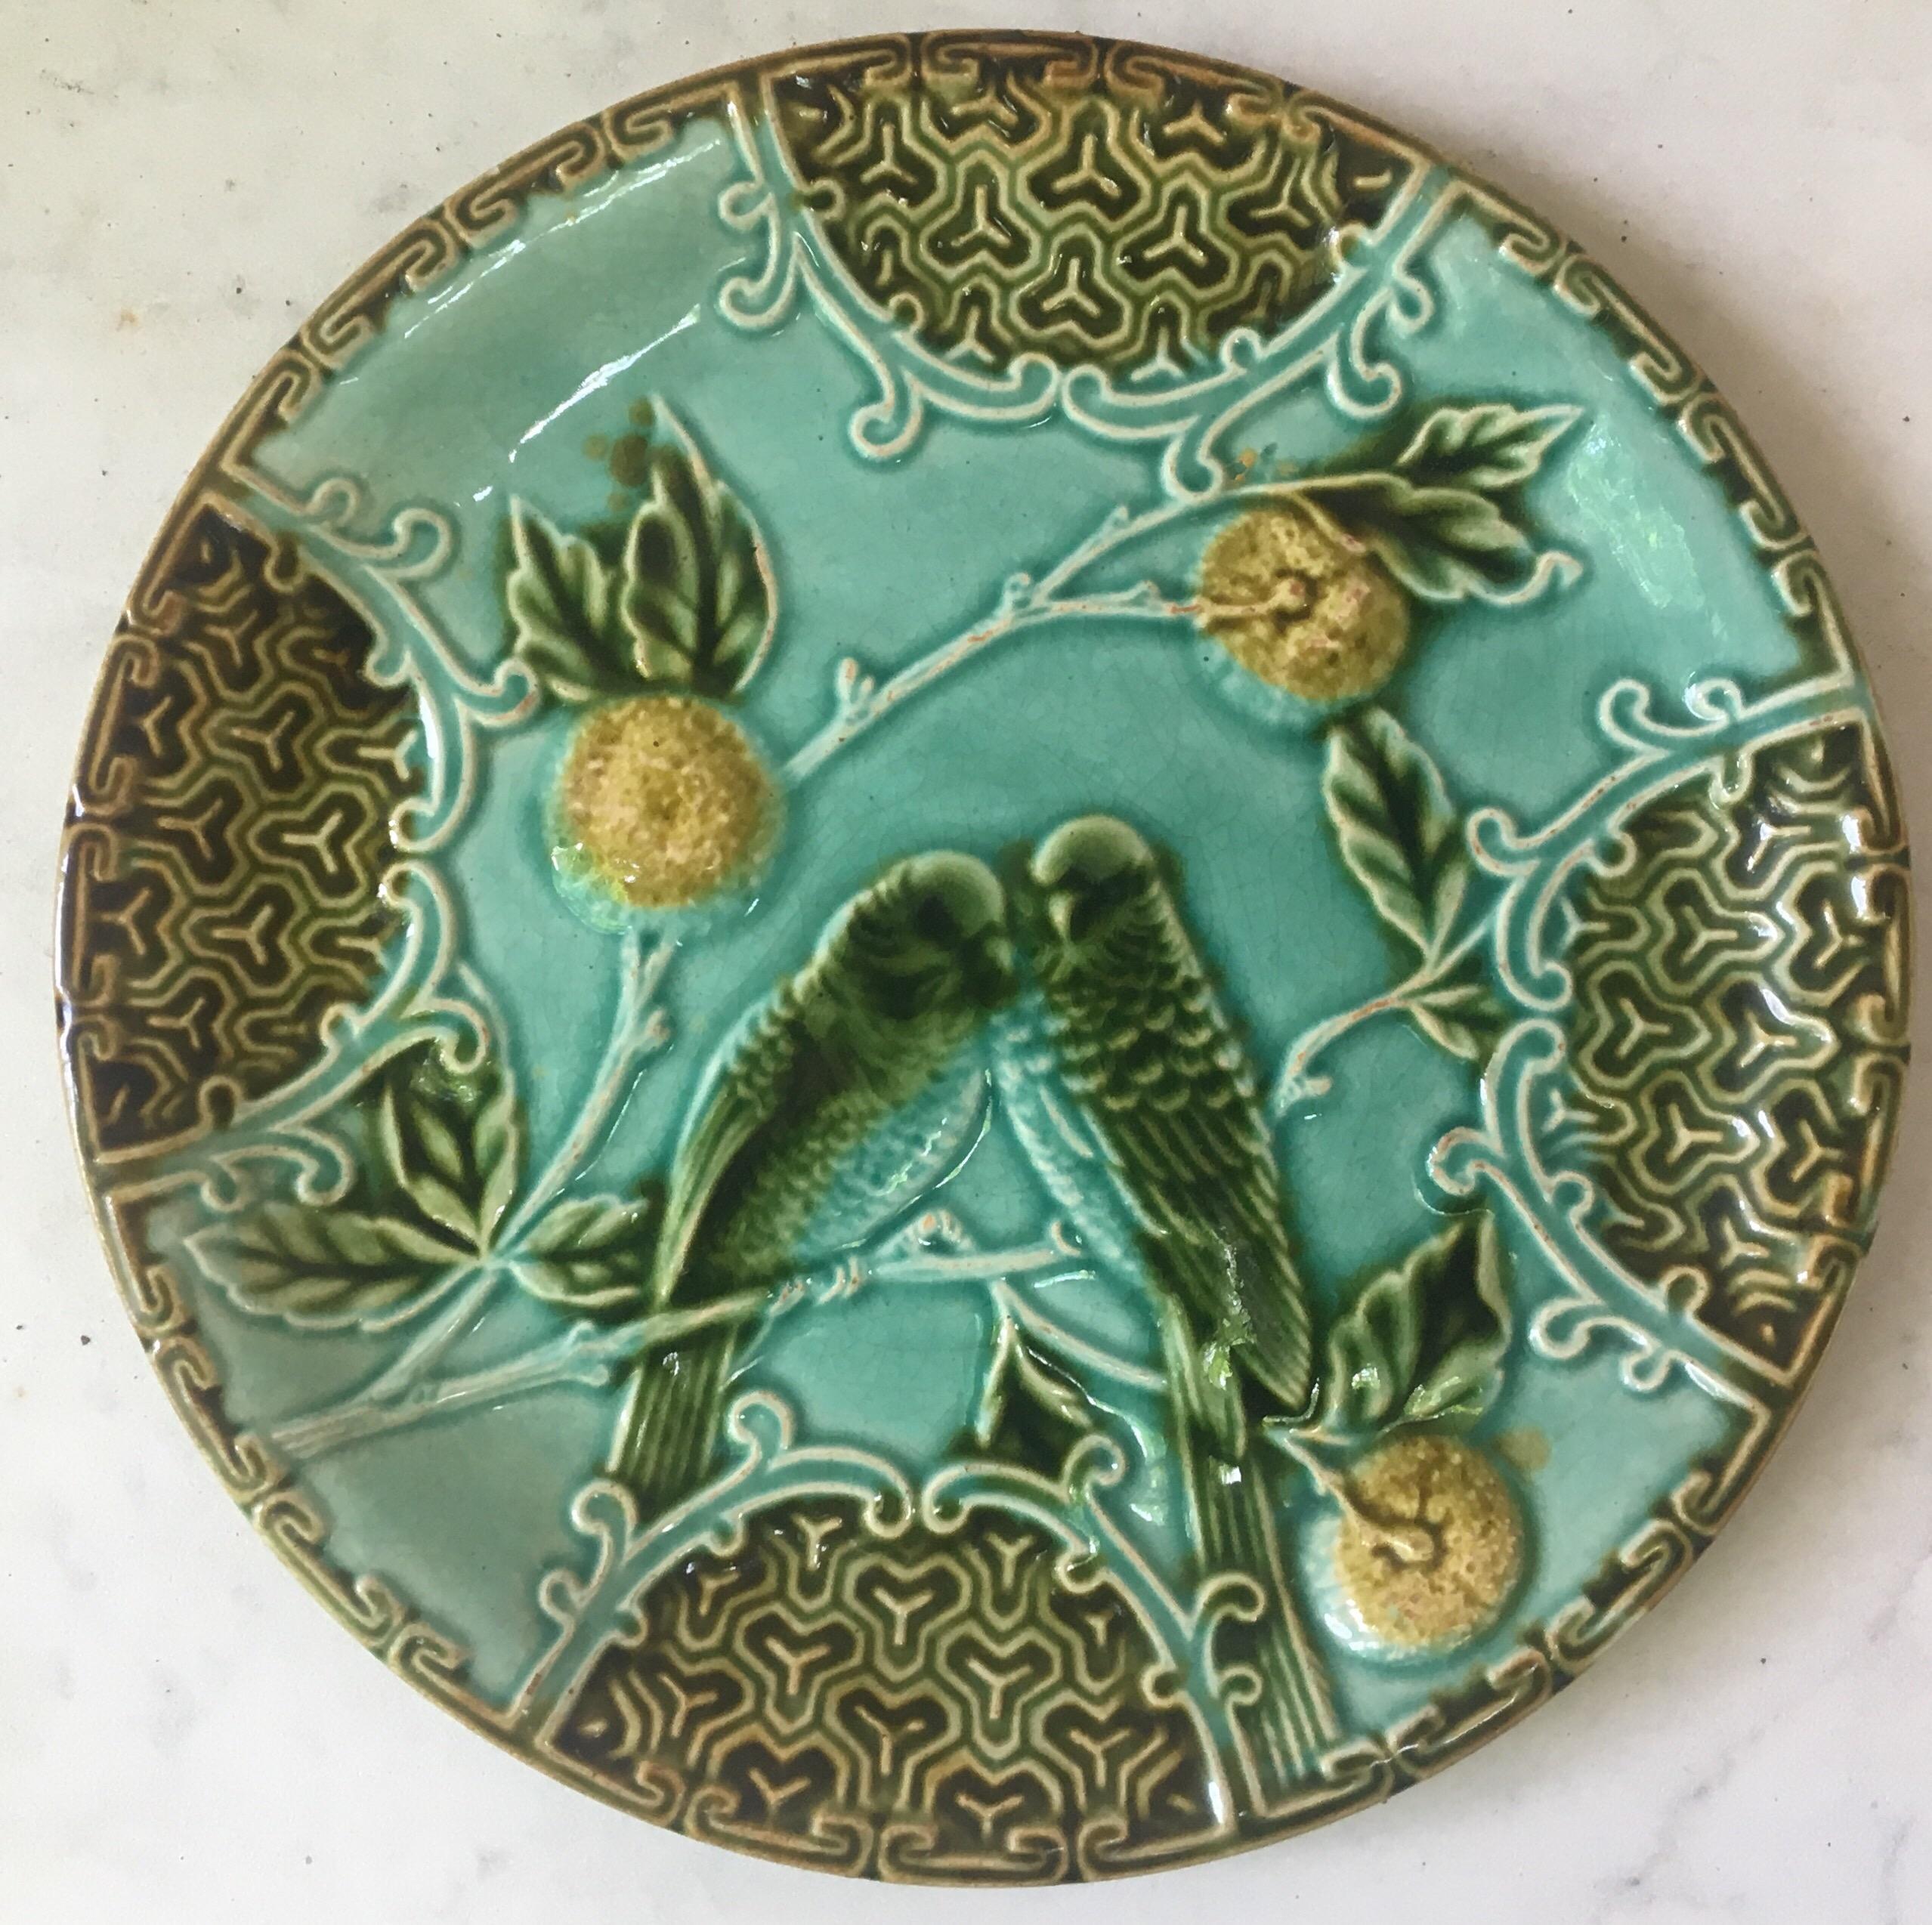 Majolica plate two parakeets on a blue background with oranges of Salins, circa 1890.
3 plates available.